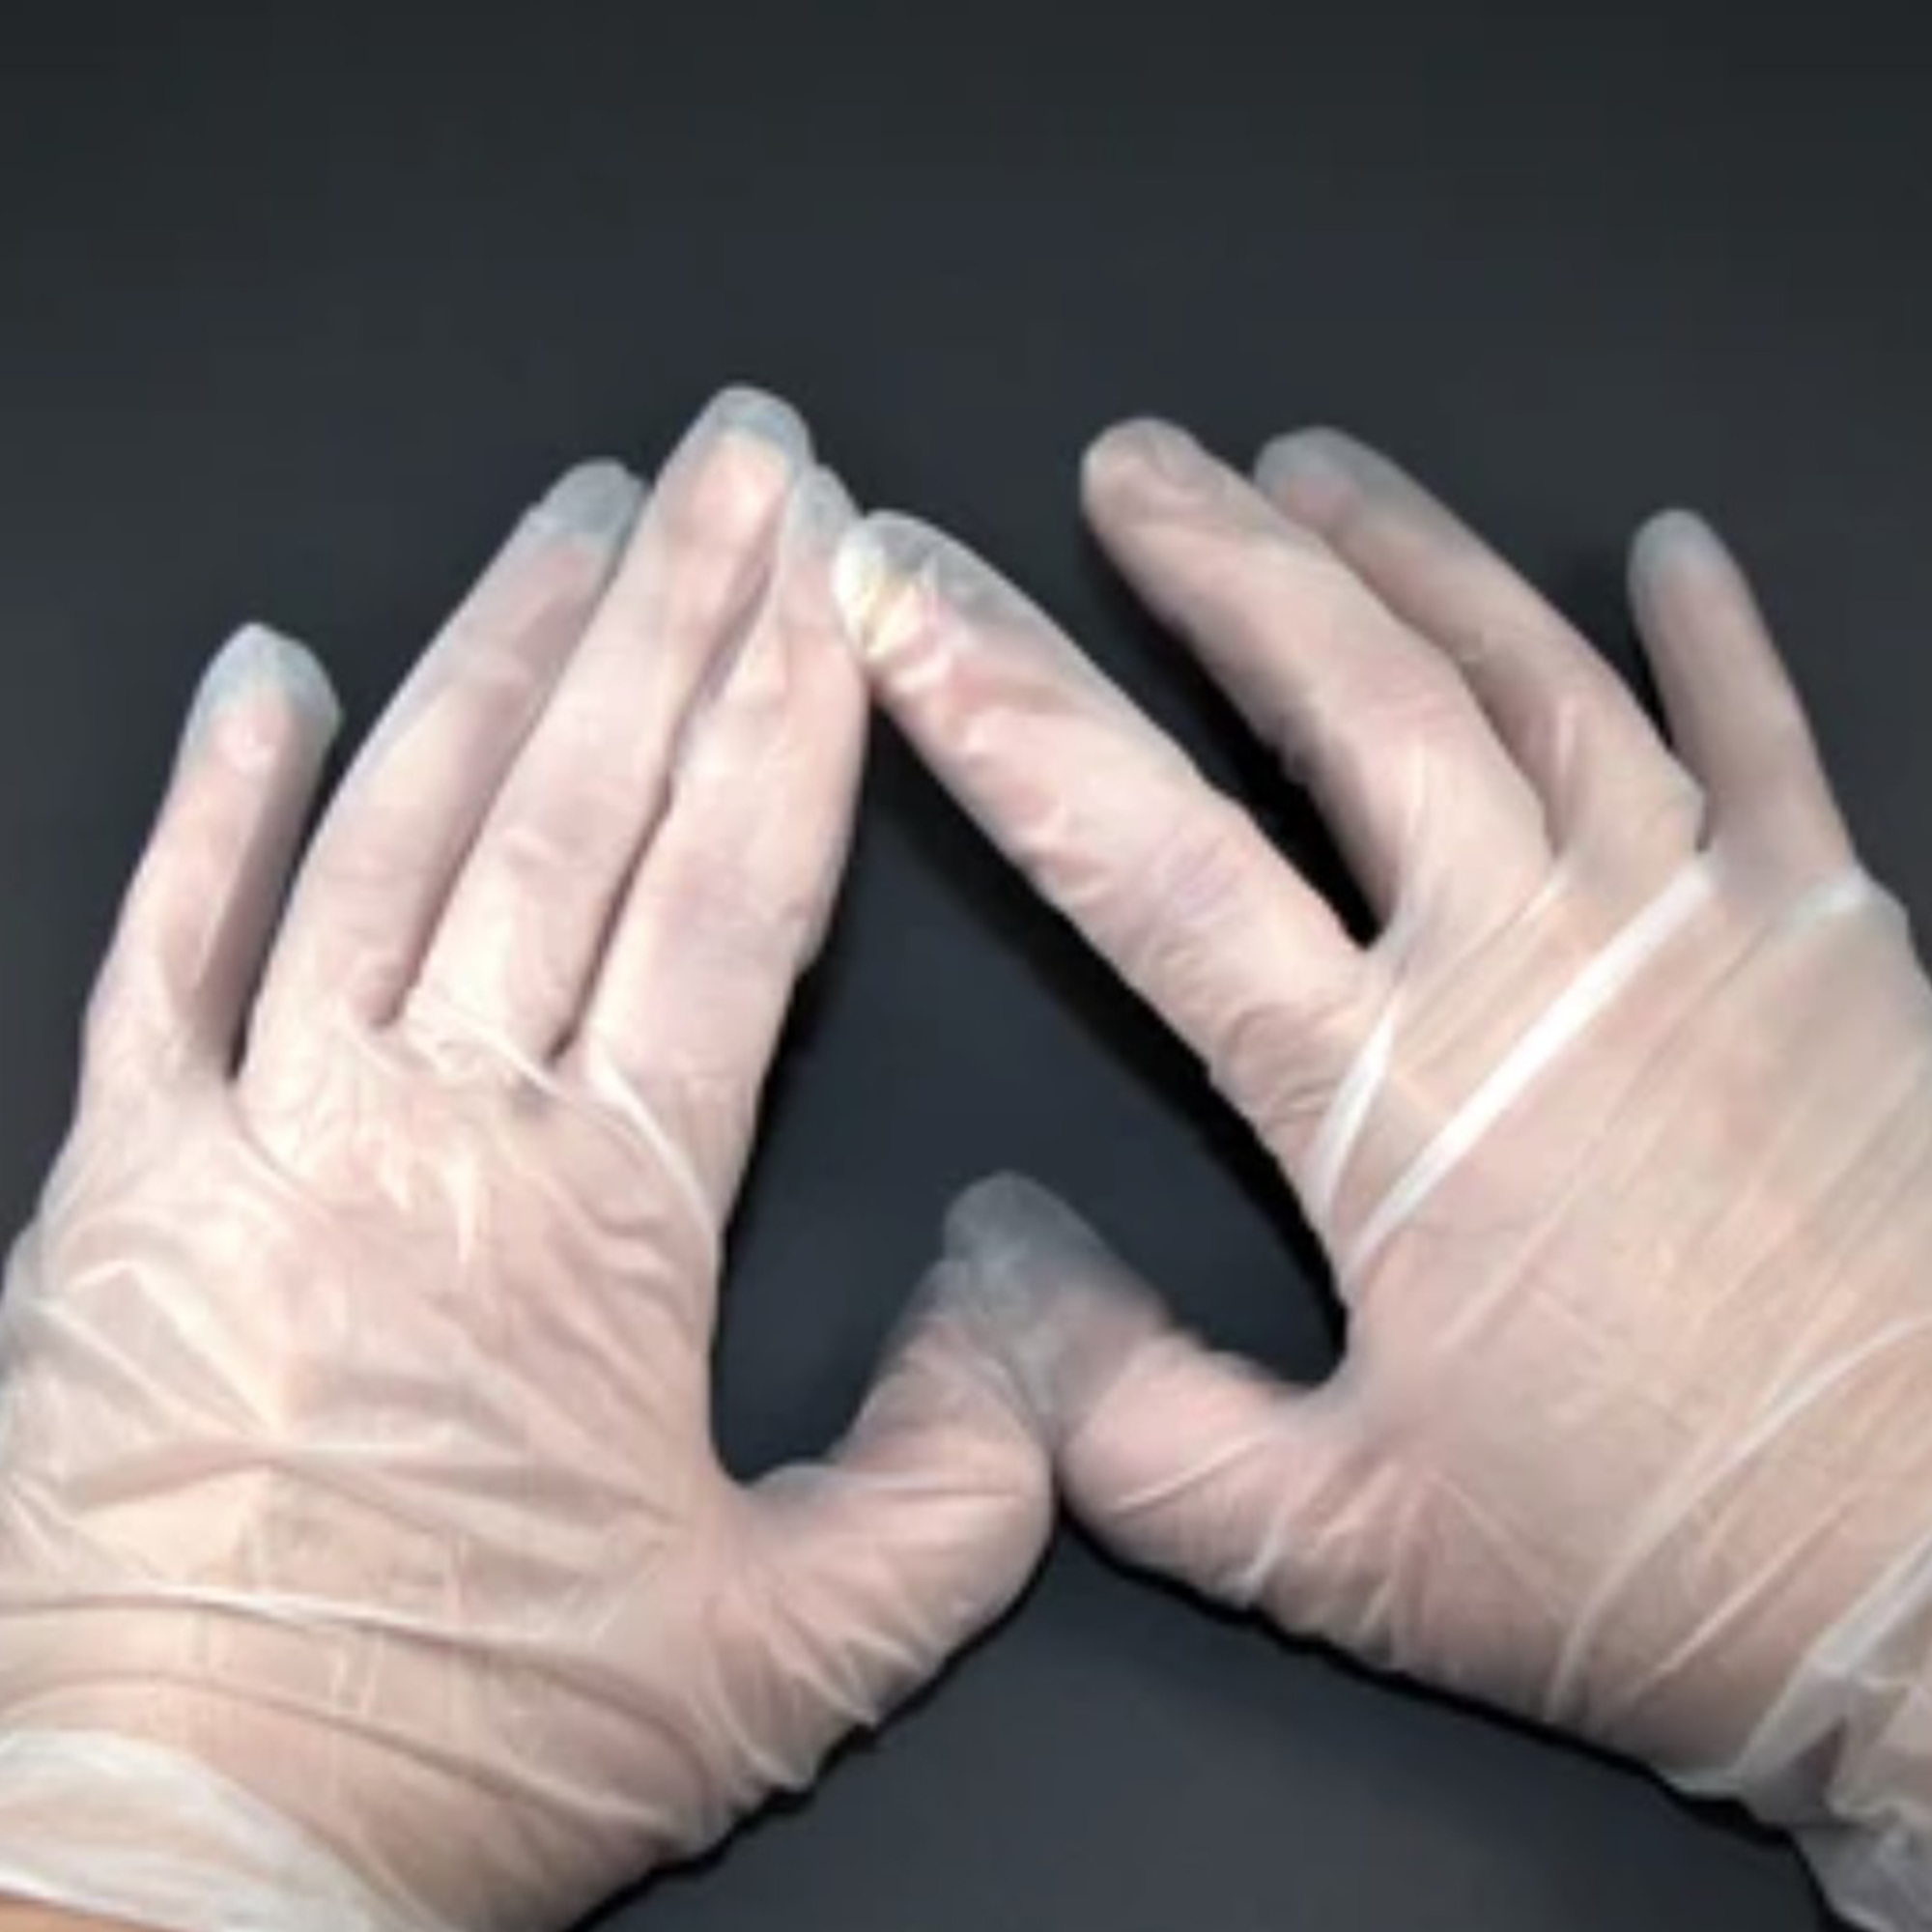 Hygiene and Safety/HYGIENE & PROTECTION EXAMINATION GLOVES/Hygiene & Protection Vinyl Gloves